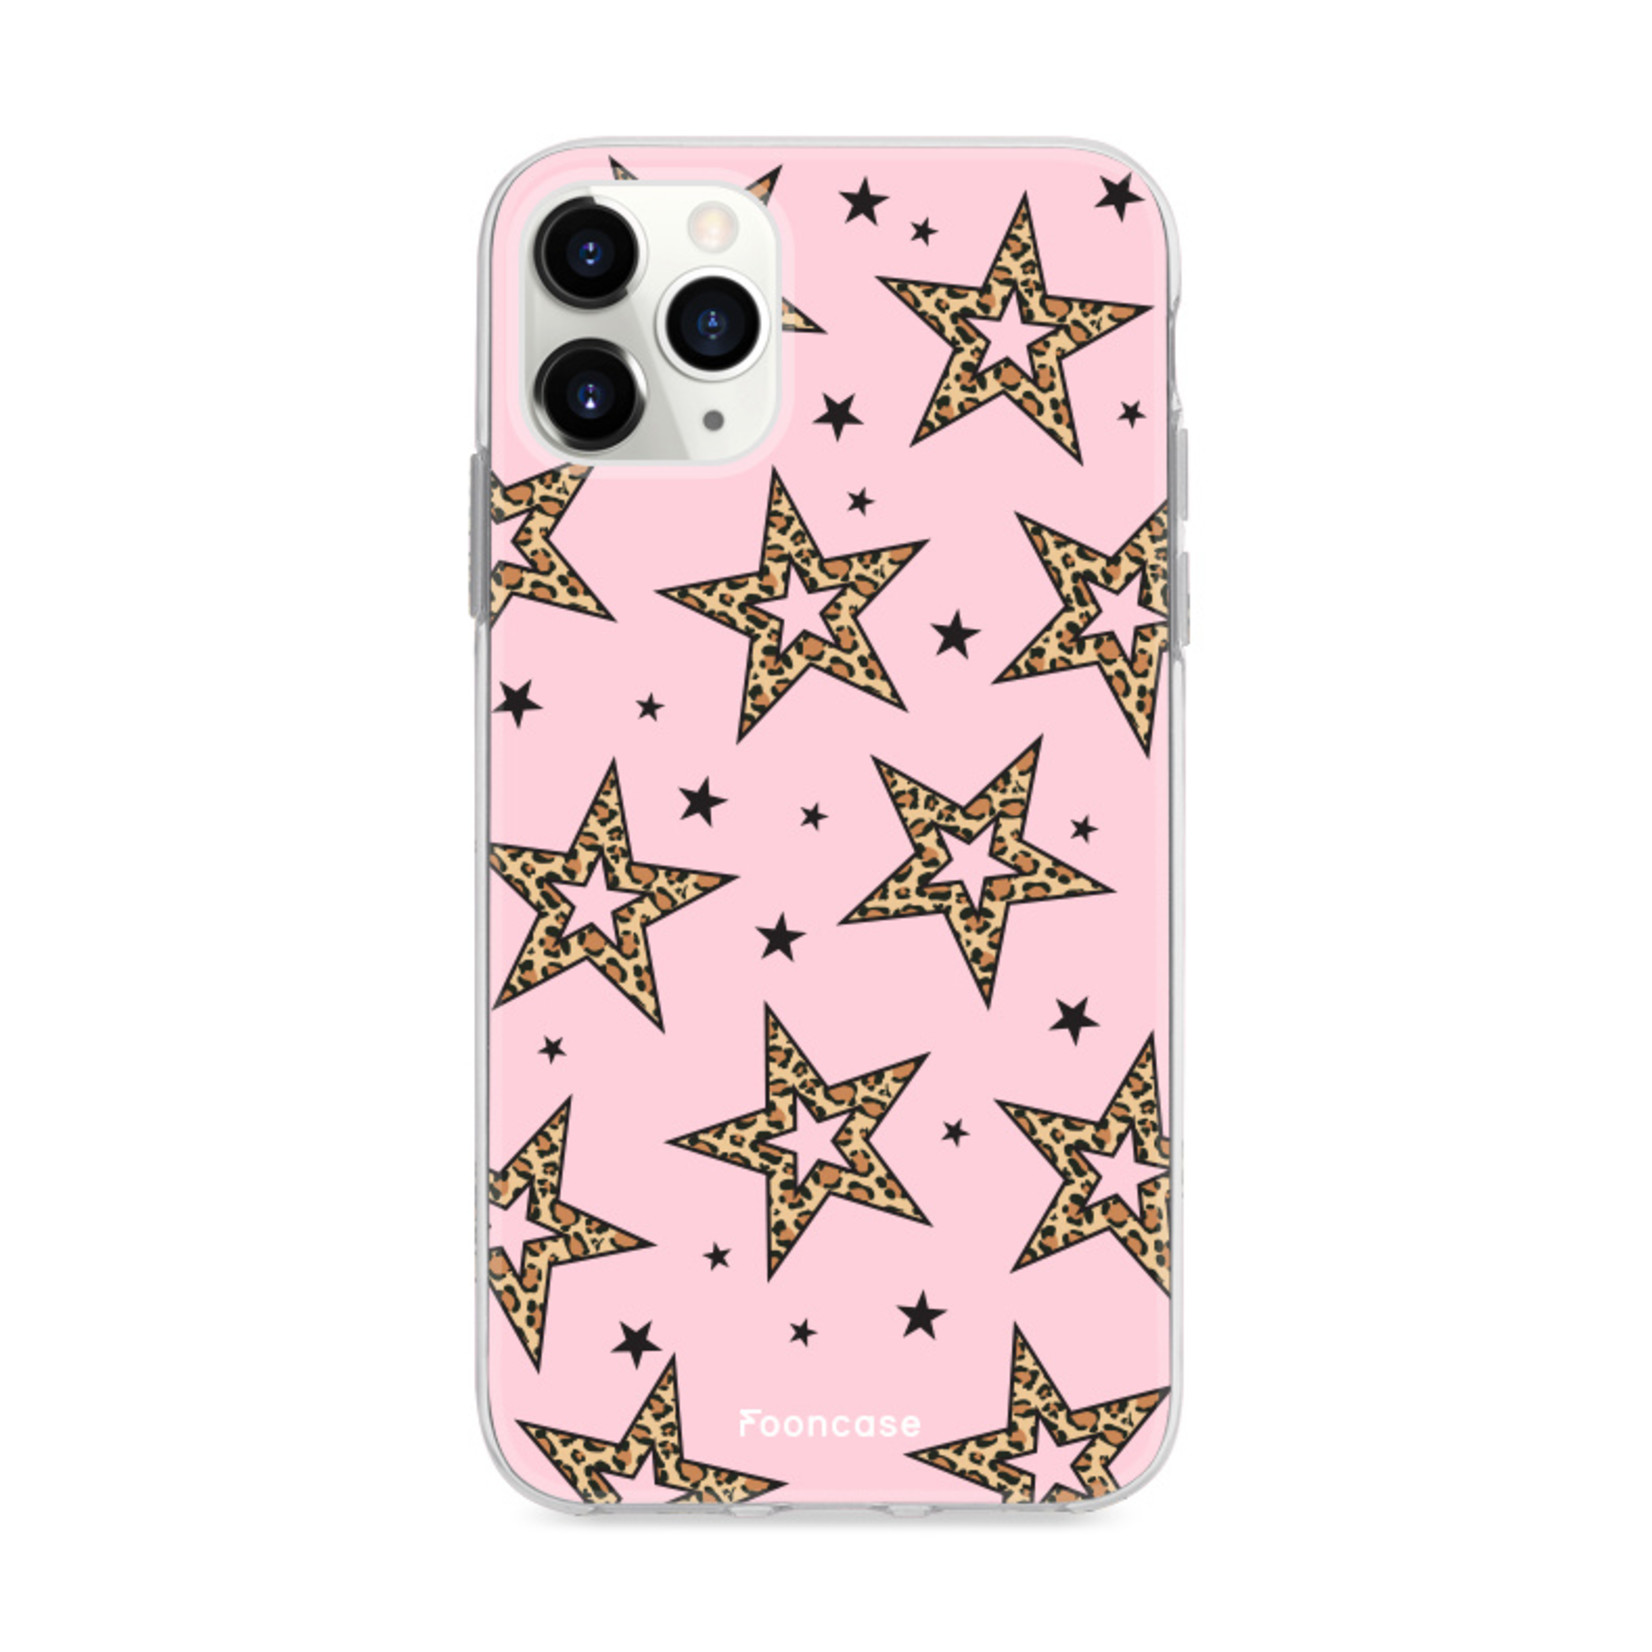 IPhone 11 Pro Max Case - Rebell Stars